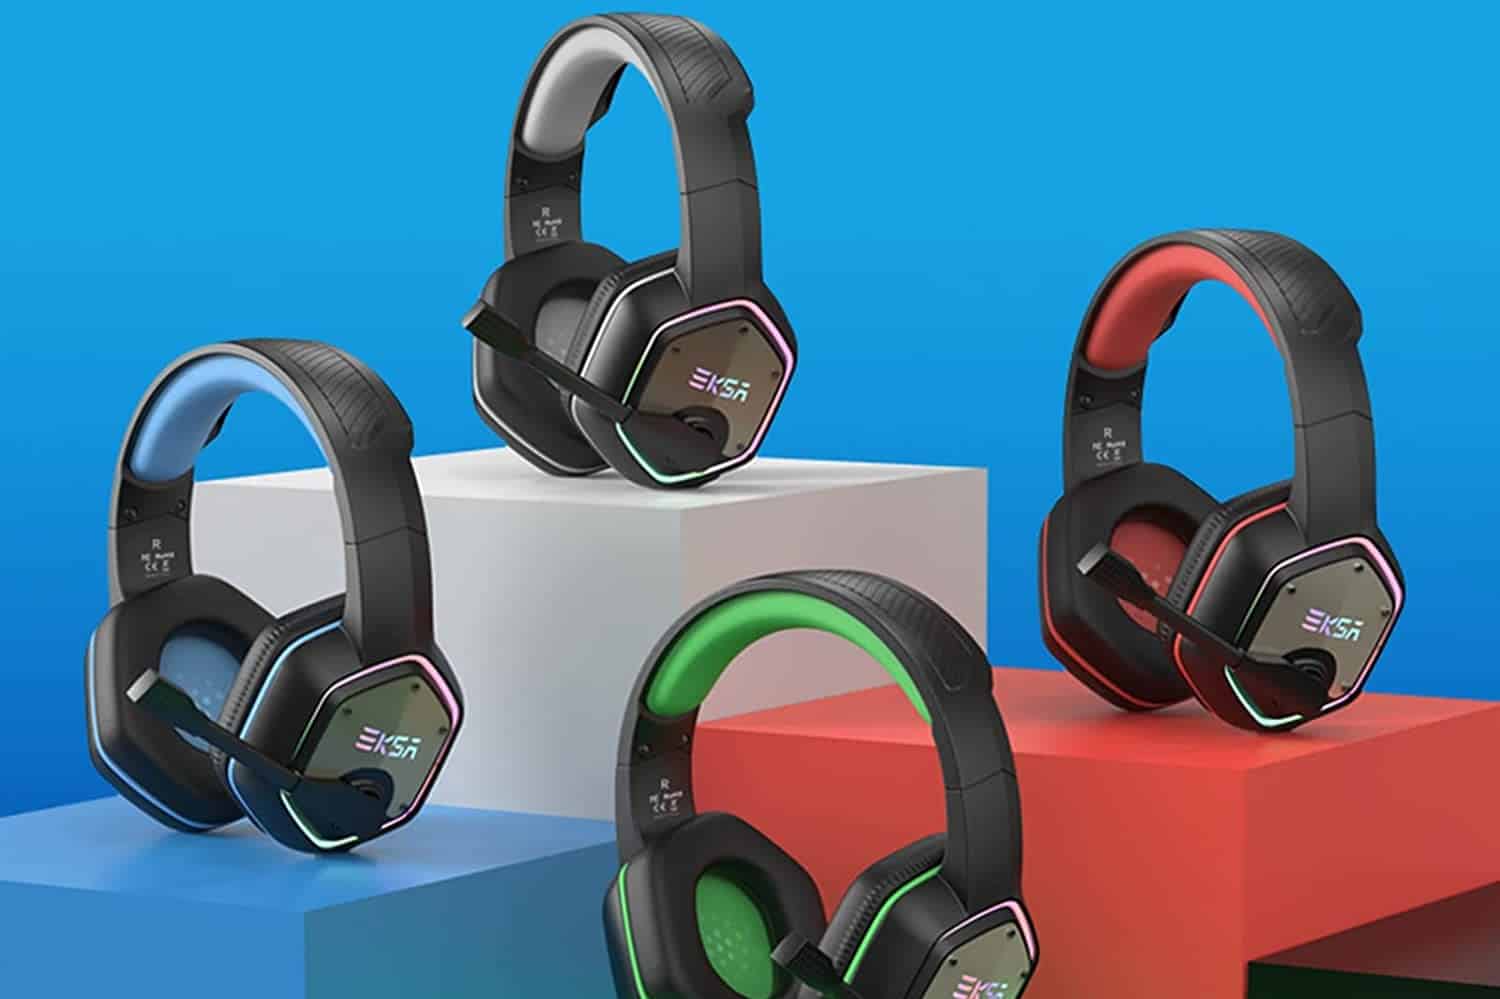 The 8 Best USB Headsets of 2022